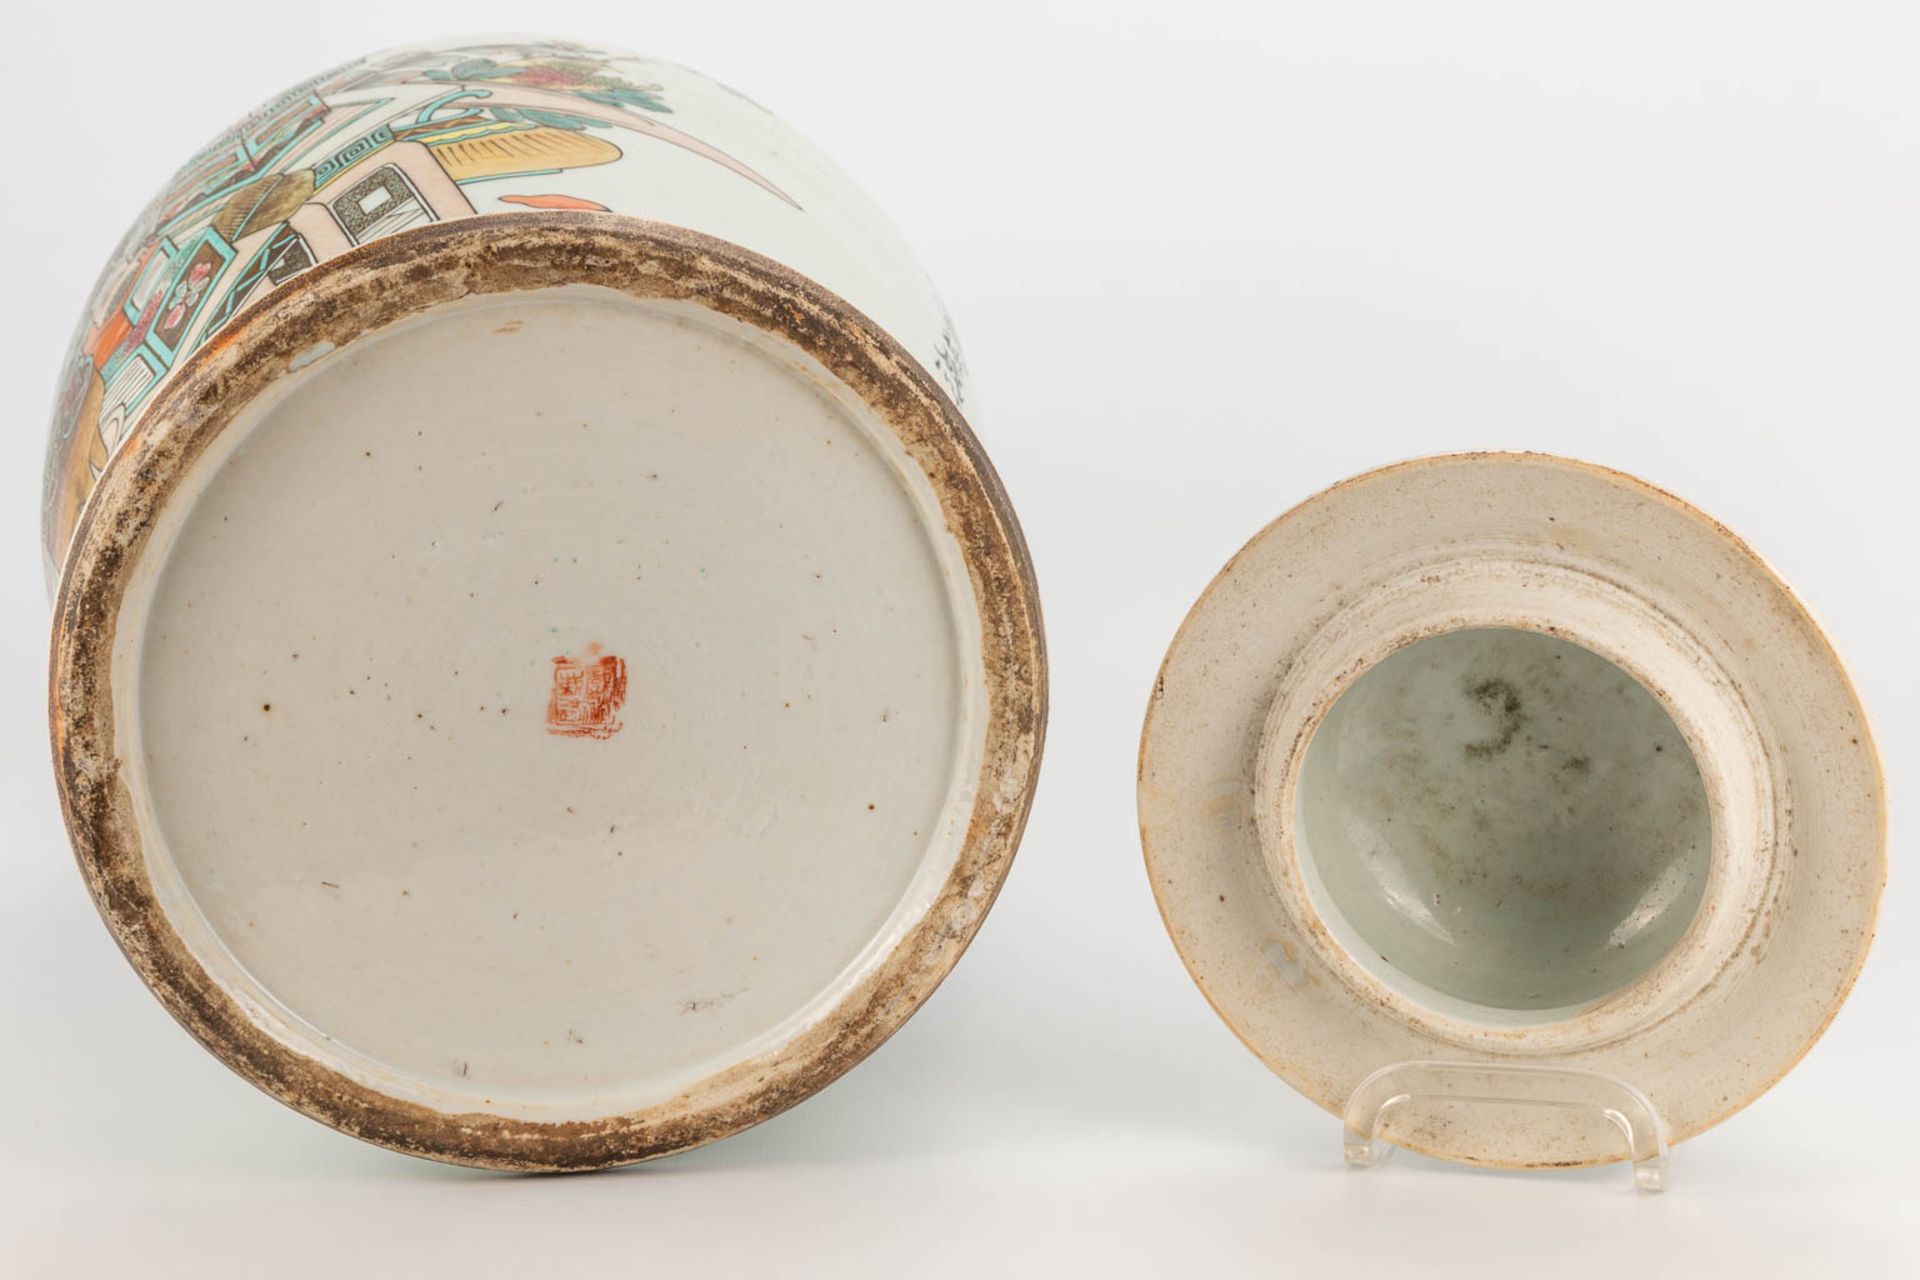 A Chinese porcelain vase with lid, decor of 100 antiquities. 19th/20th century. (43 x 27 cm) - Image 13 of 20